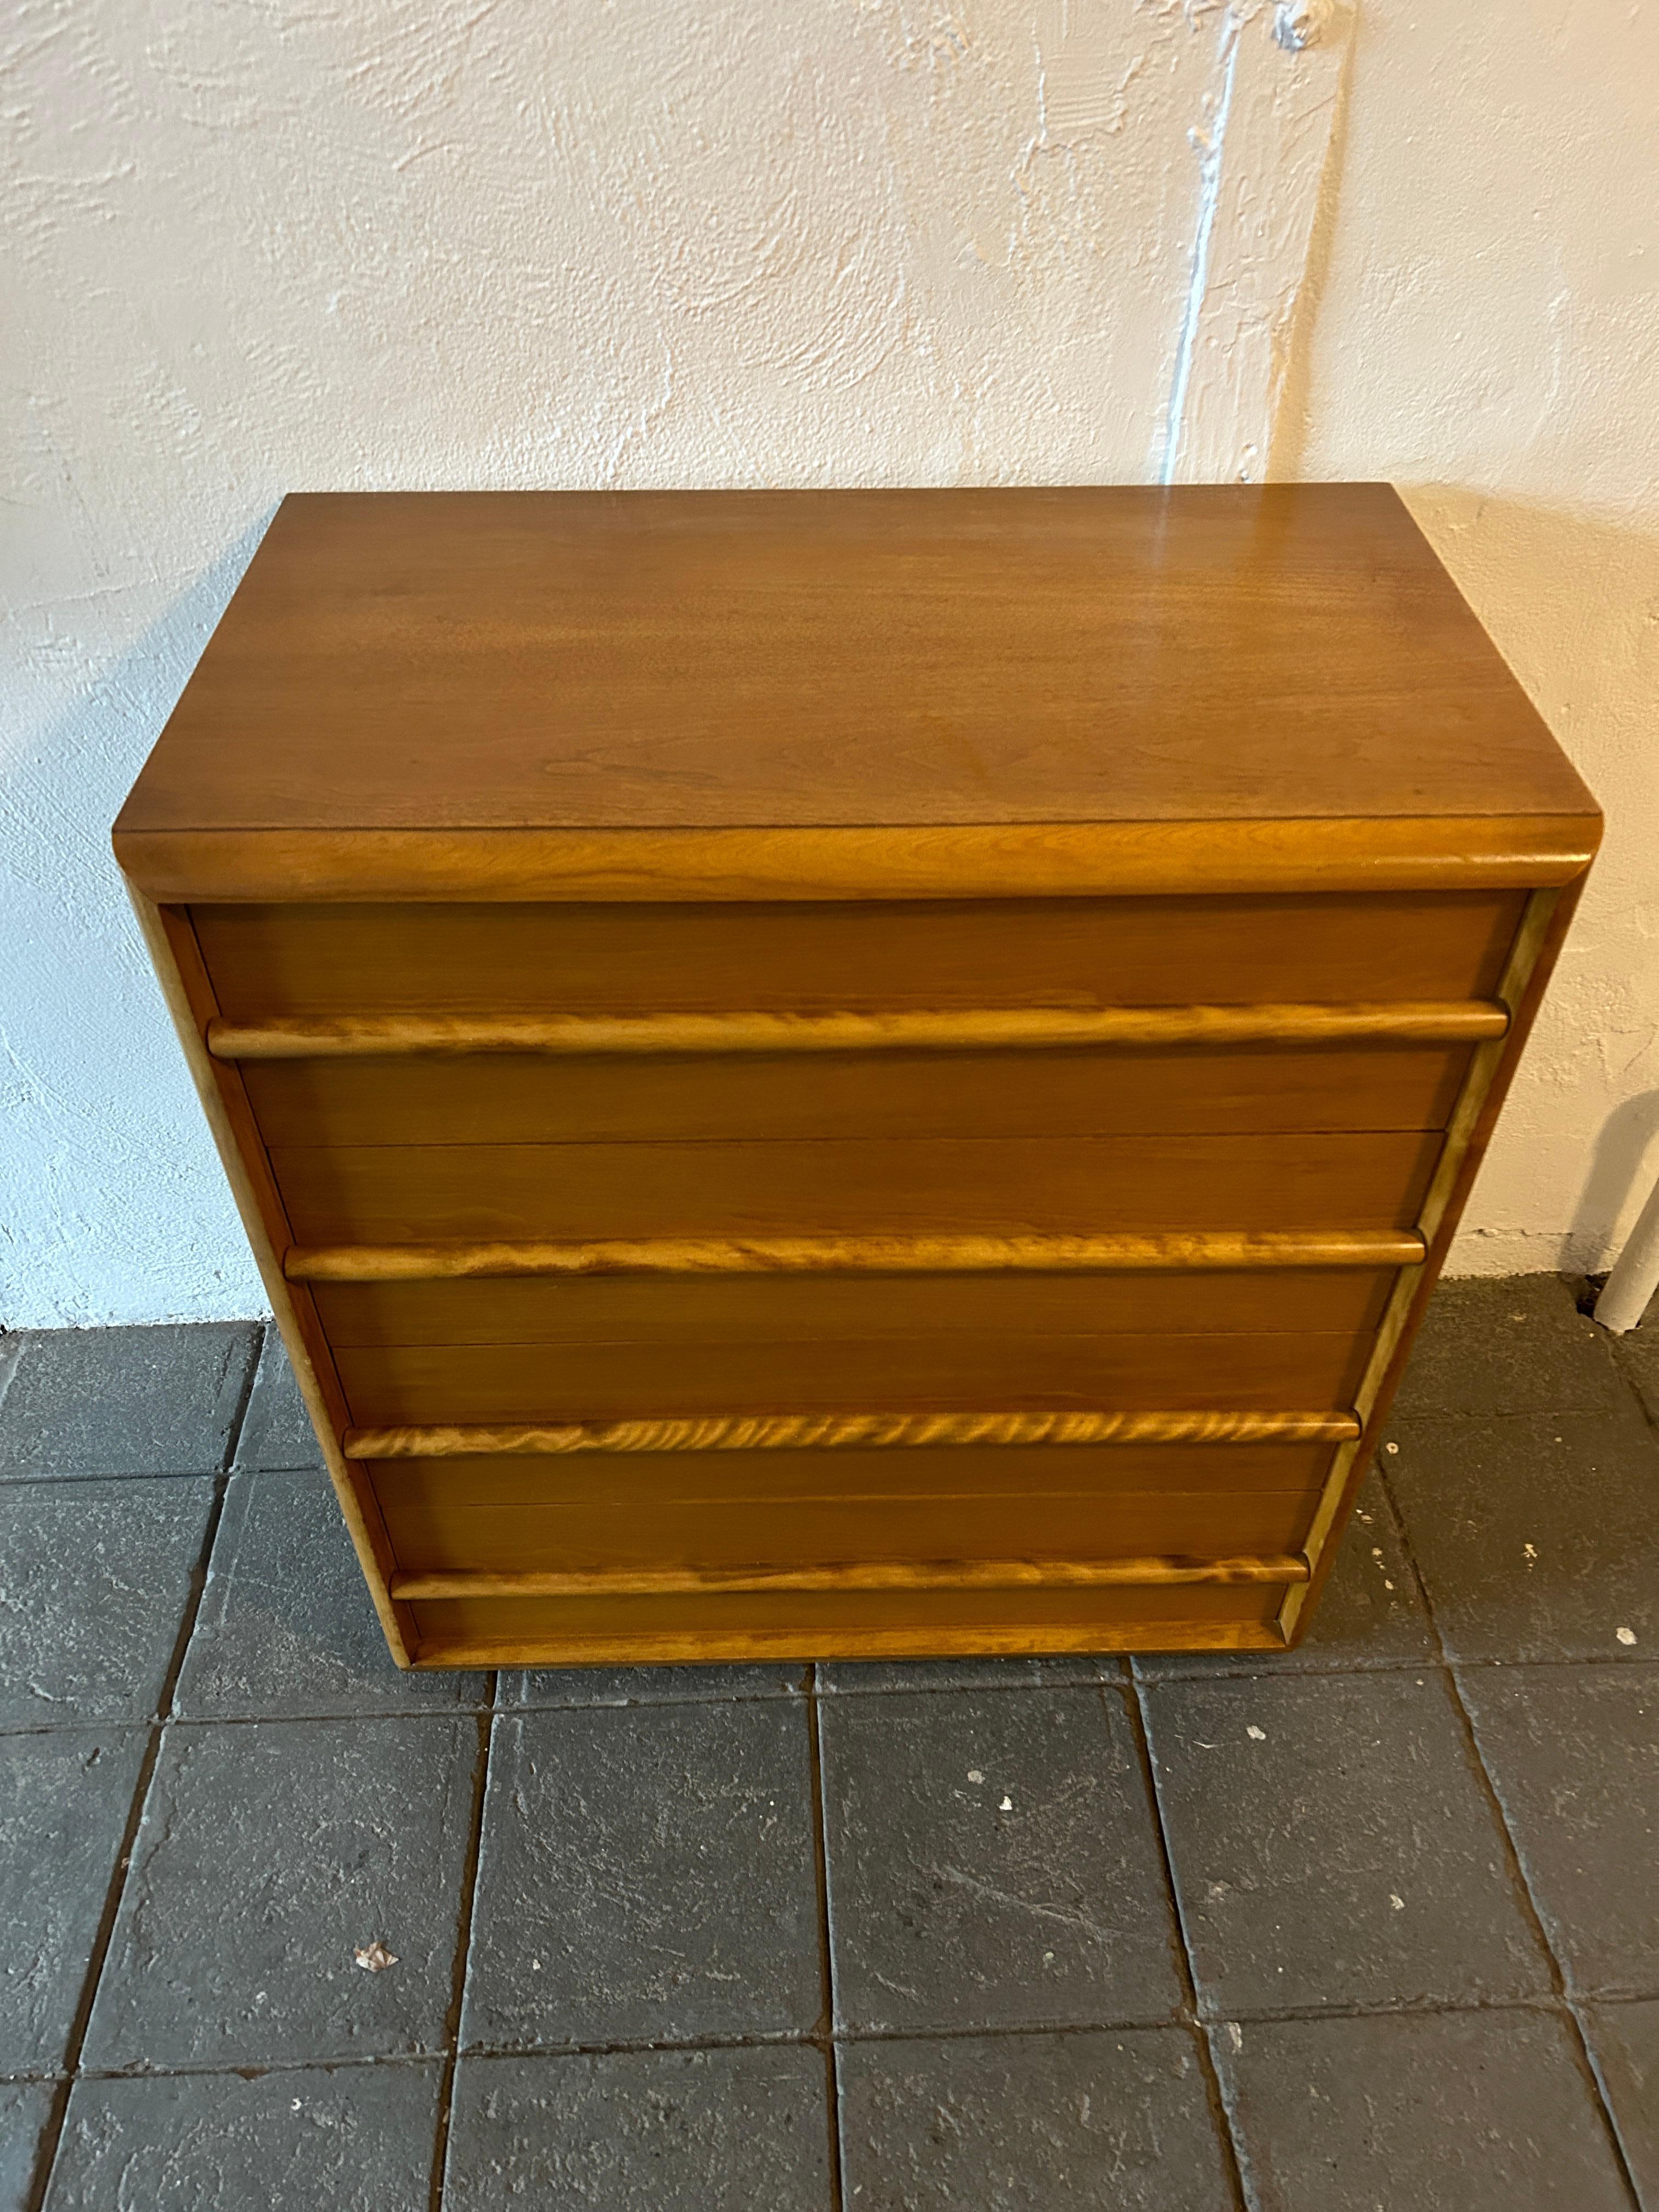 Wonderful blonde maple 4 drawer tall dresser by T.H. Robsjohn-Gibbings for Widdicomb - Great vintage condition - Shows little signs of use. Has 4 solid oak drawers with moving dividers and sliding jewelry box - all dividers can be removed. Great